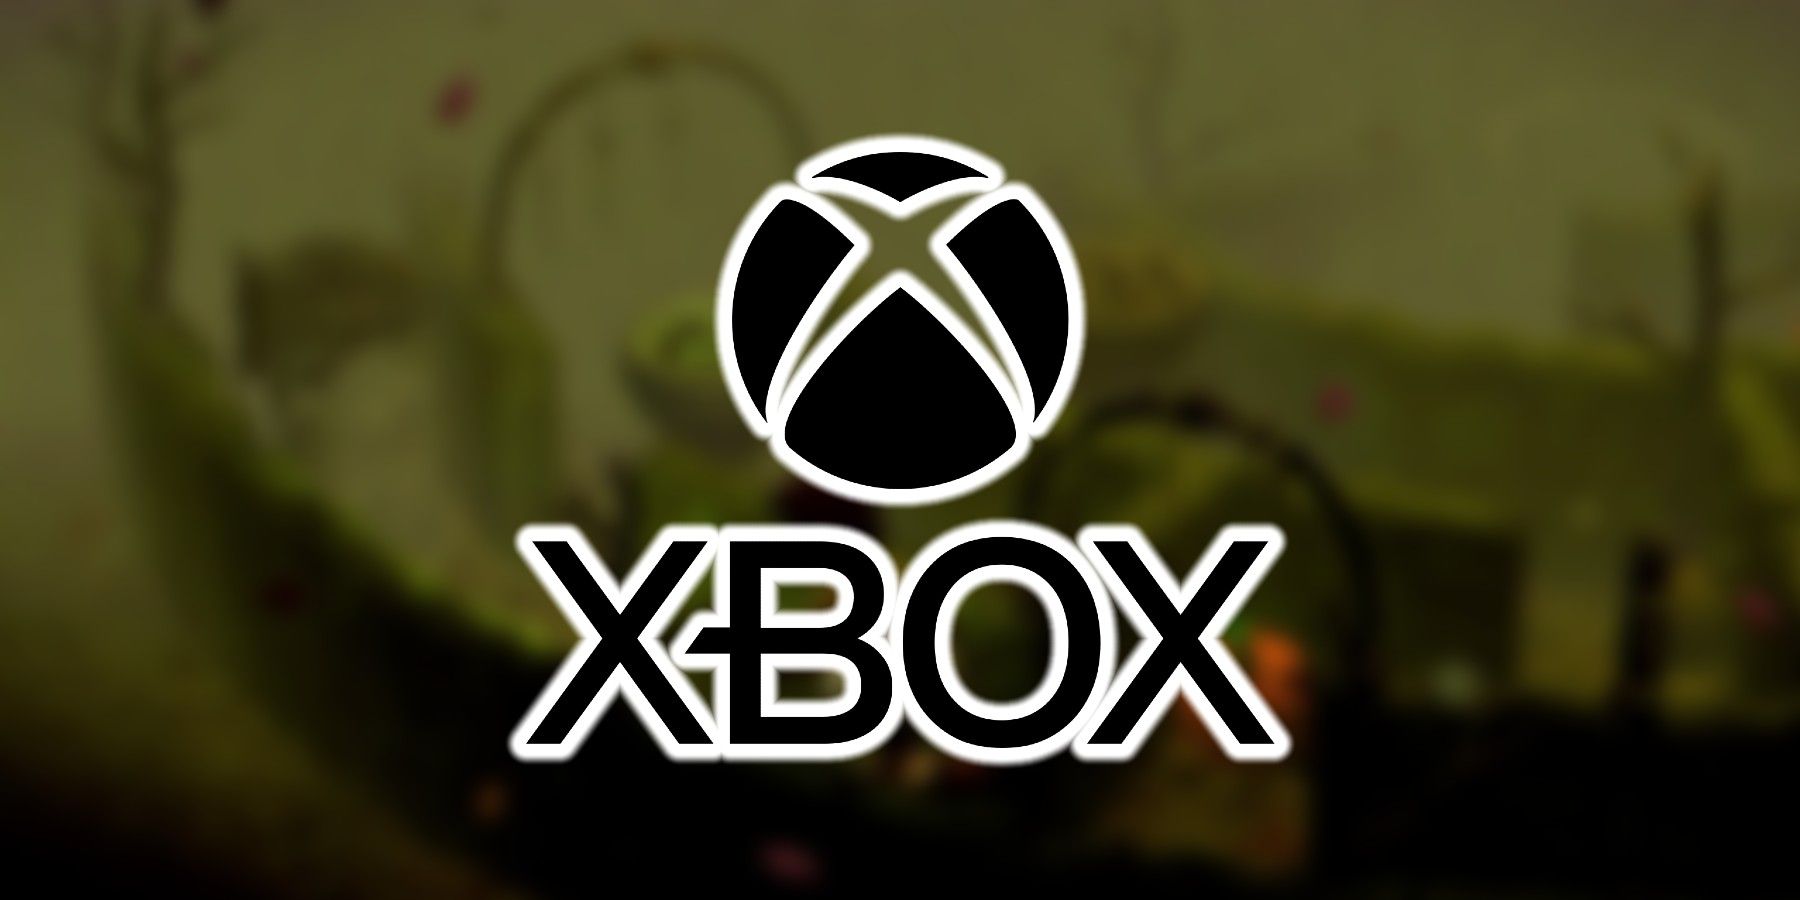 xbox-logo-crow-country-blurred-background